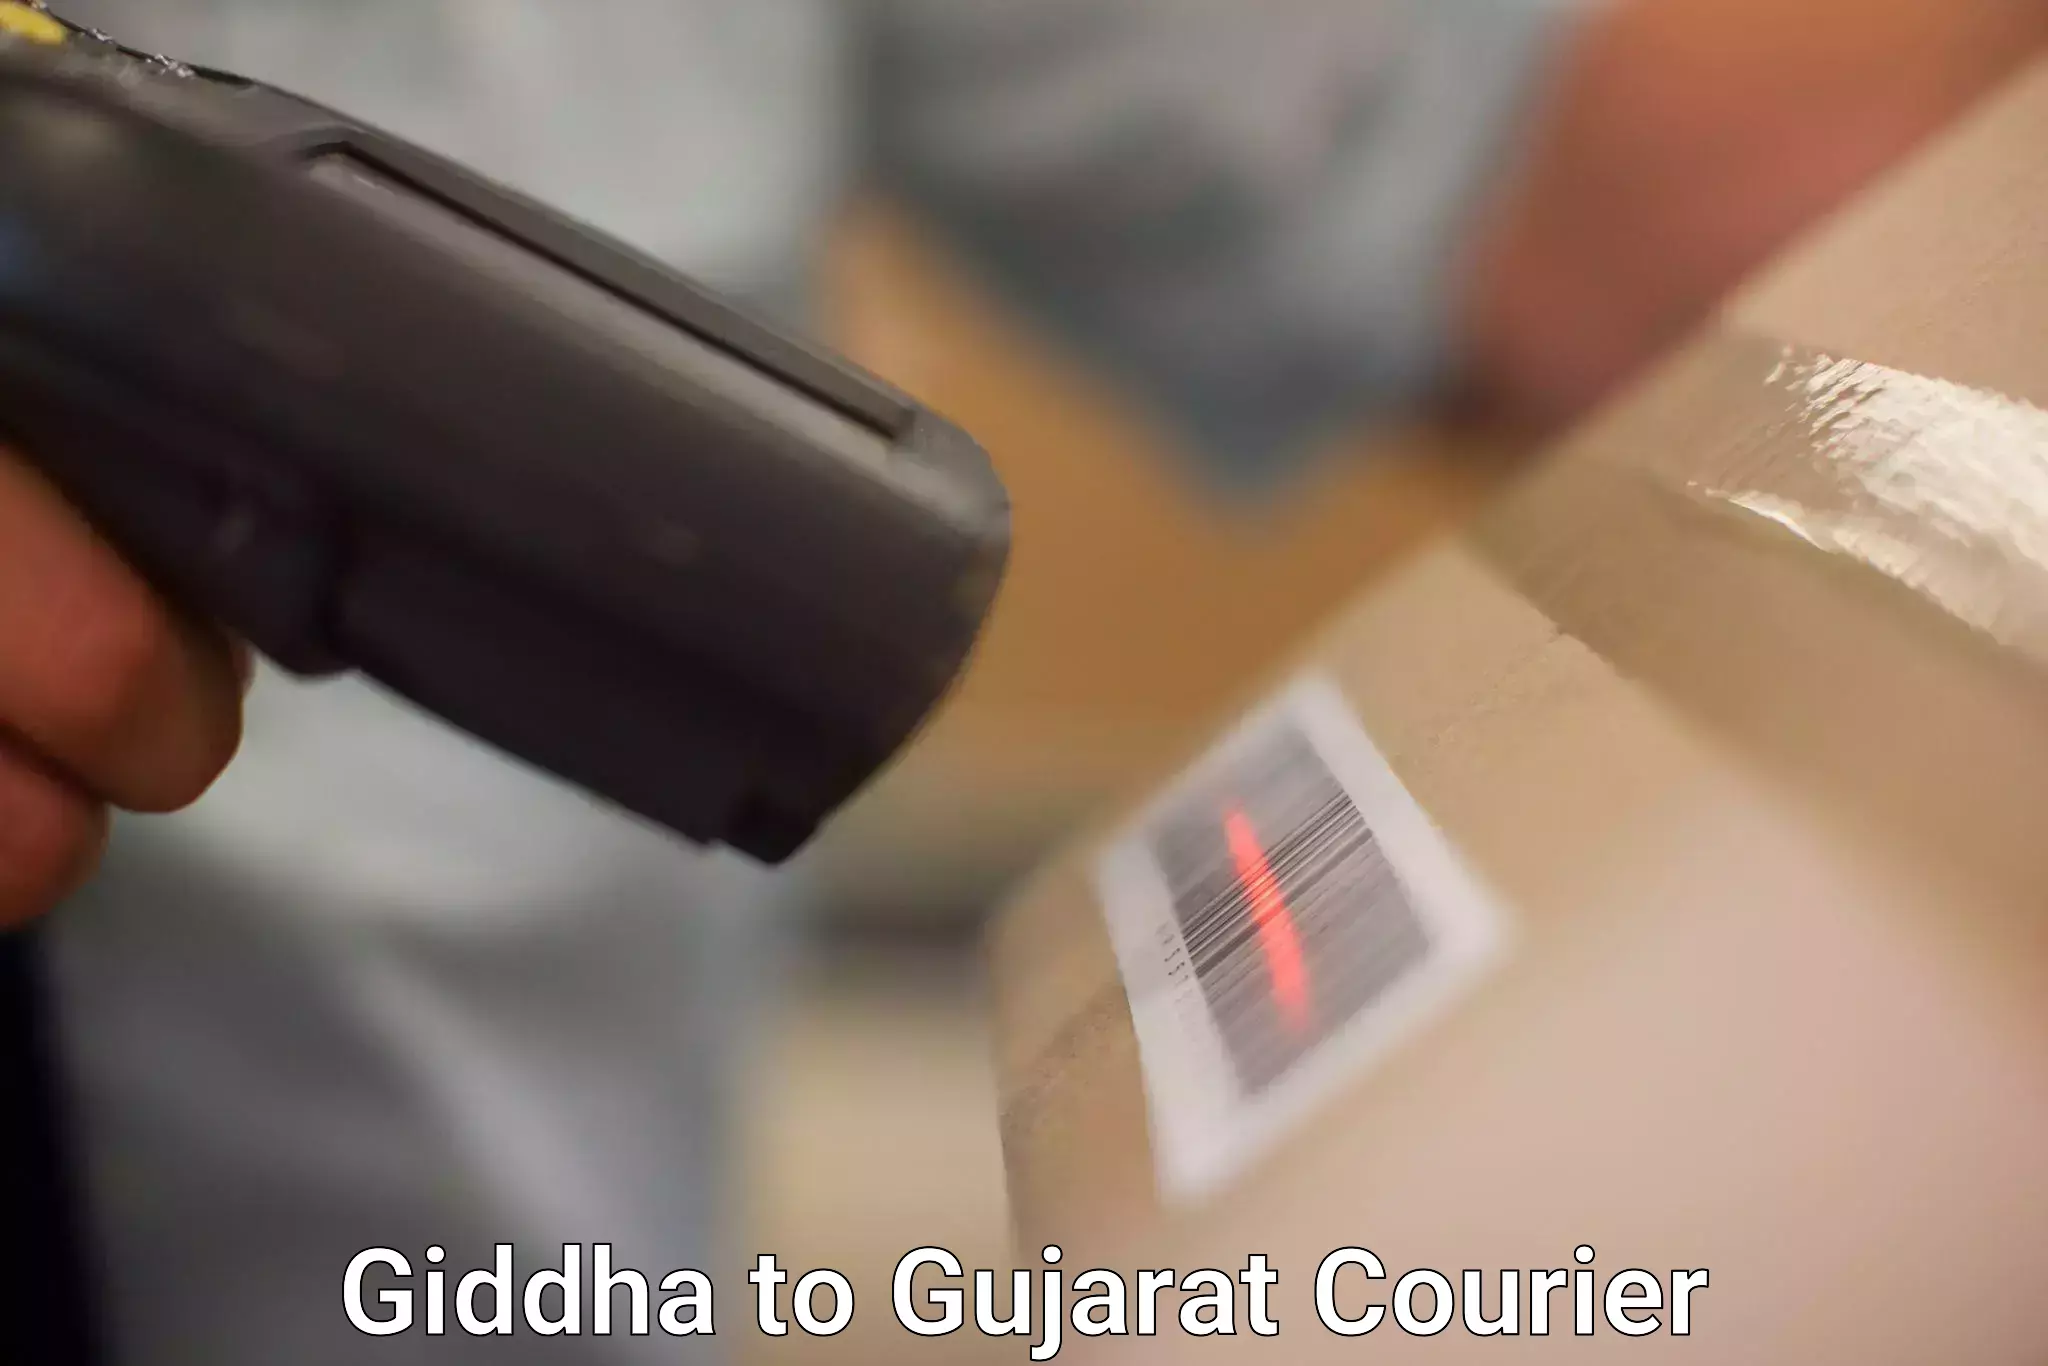 Sustainable delivery practices Giddha to Gujarat